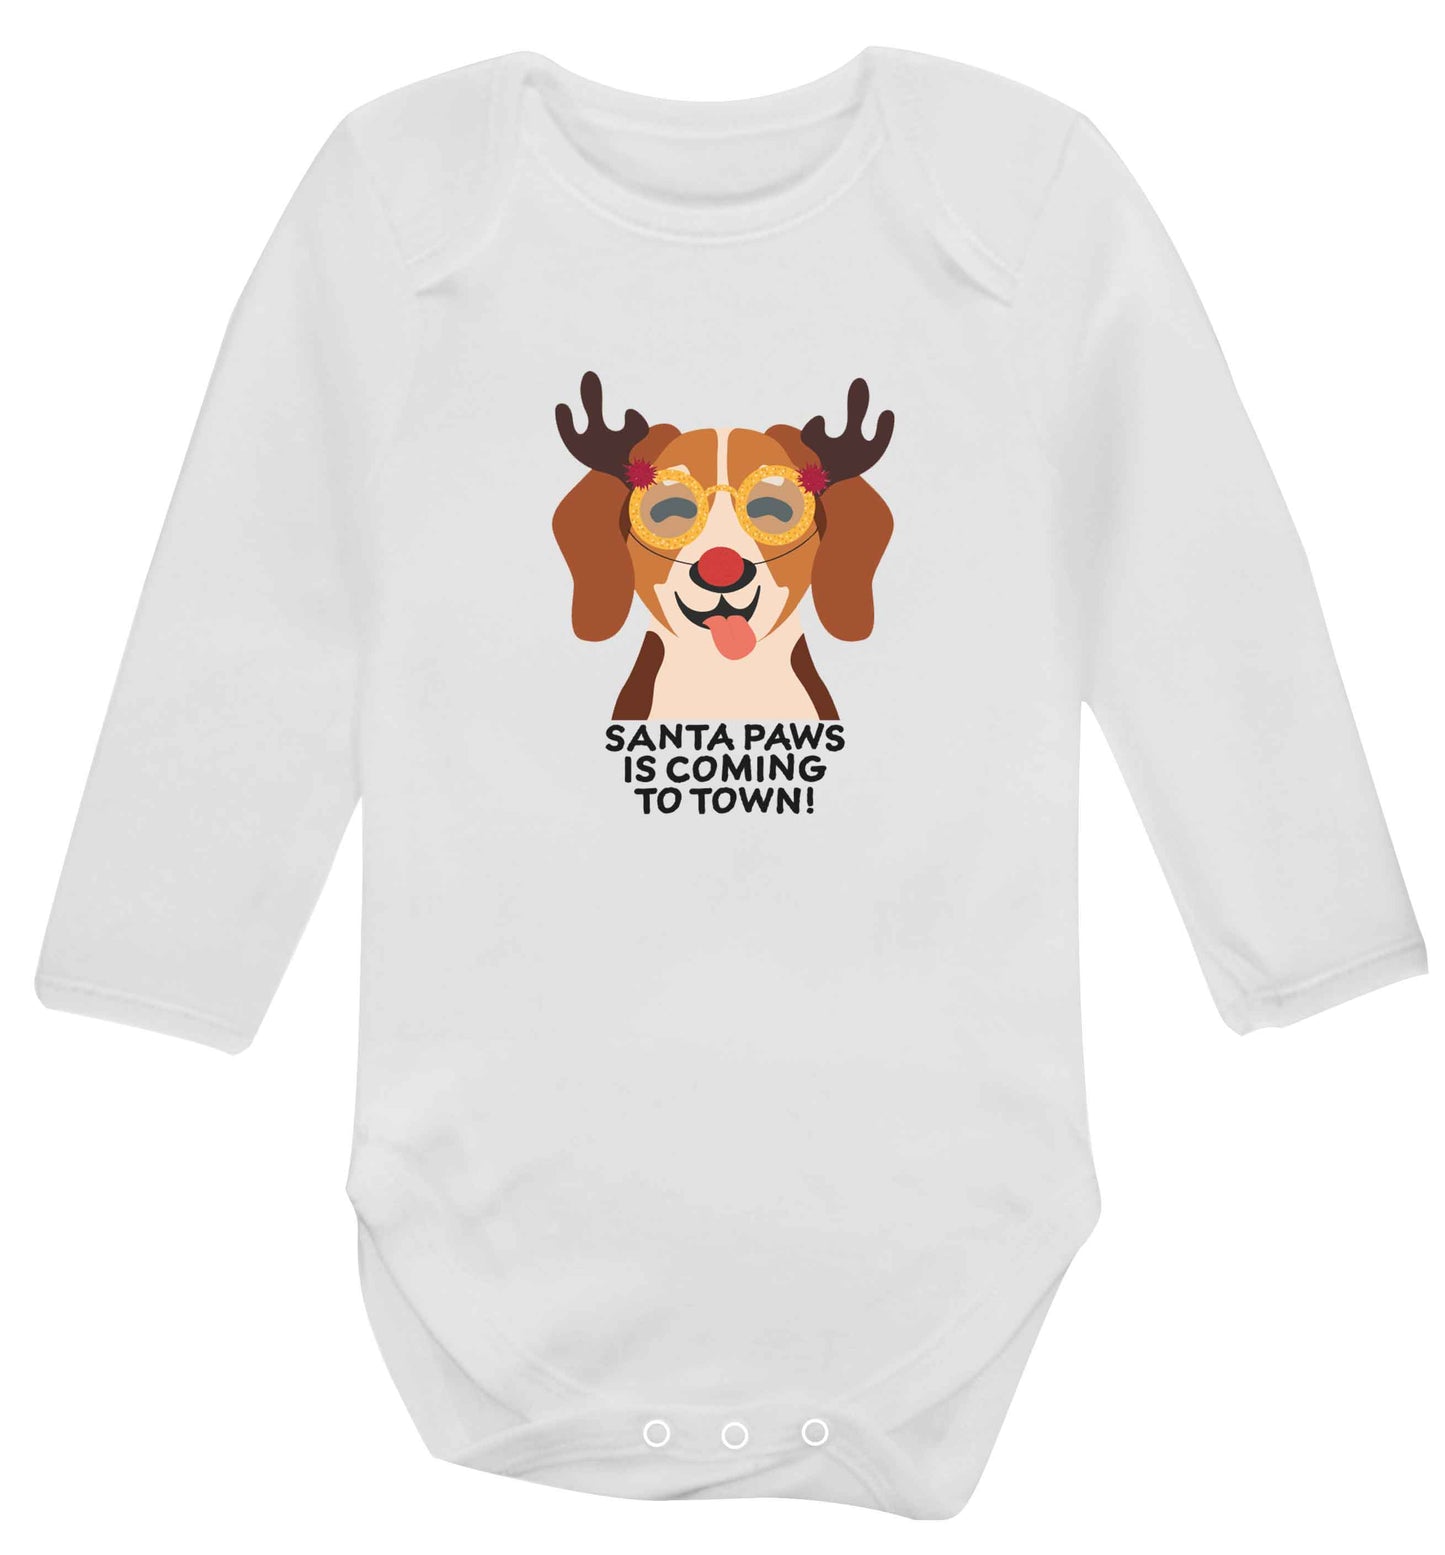 Santa paws is coming to town baby vest long sleeved white 6-12 months